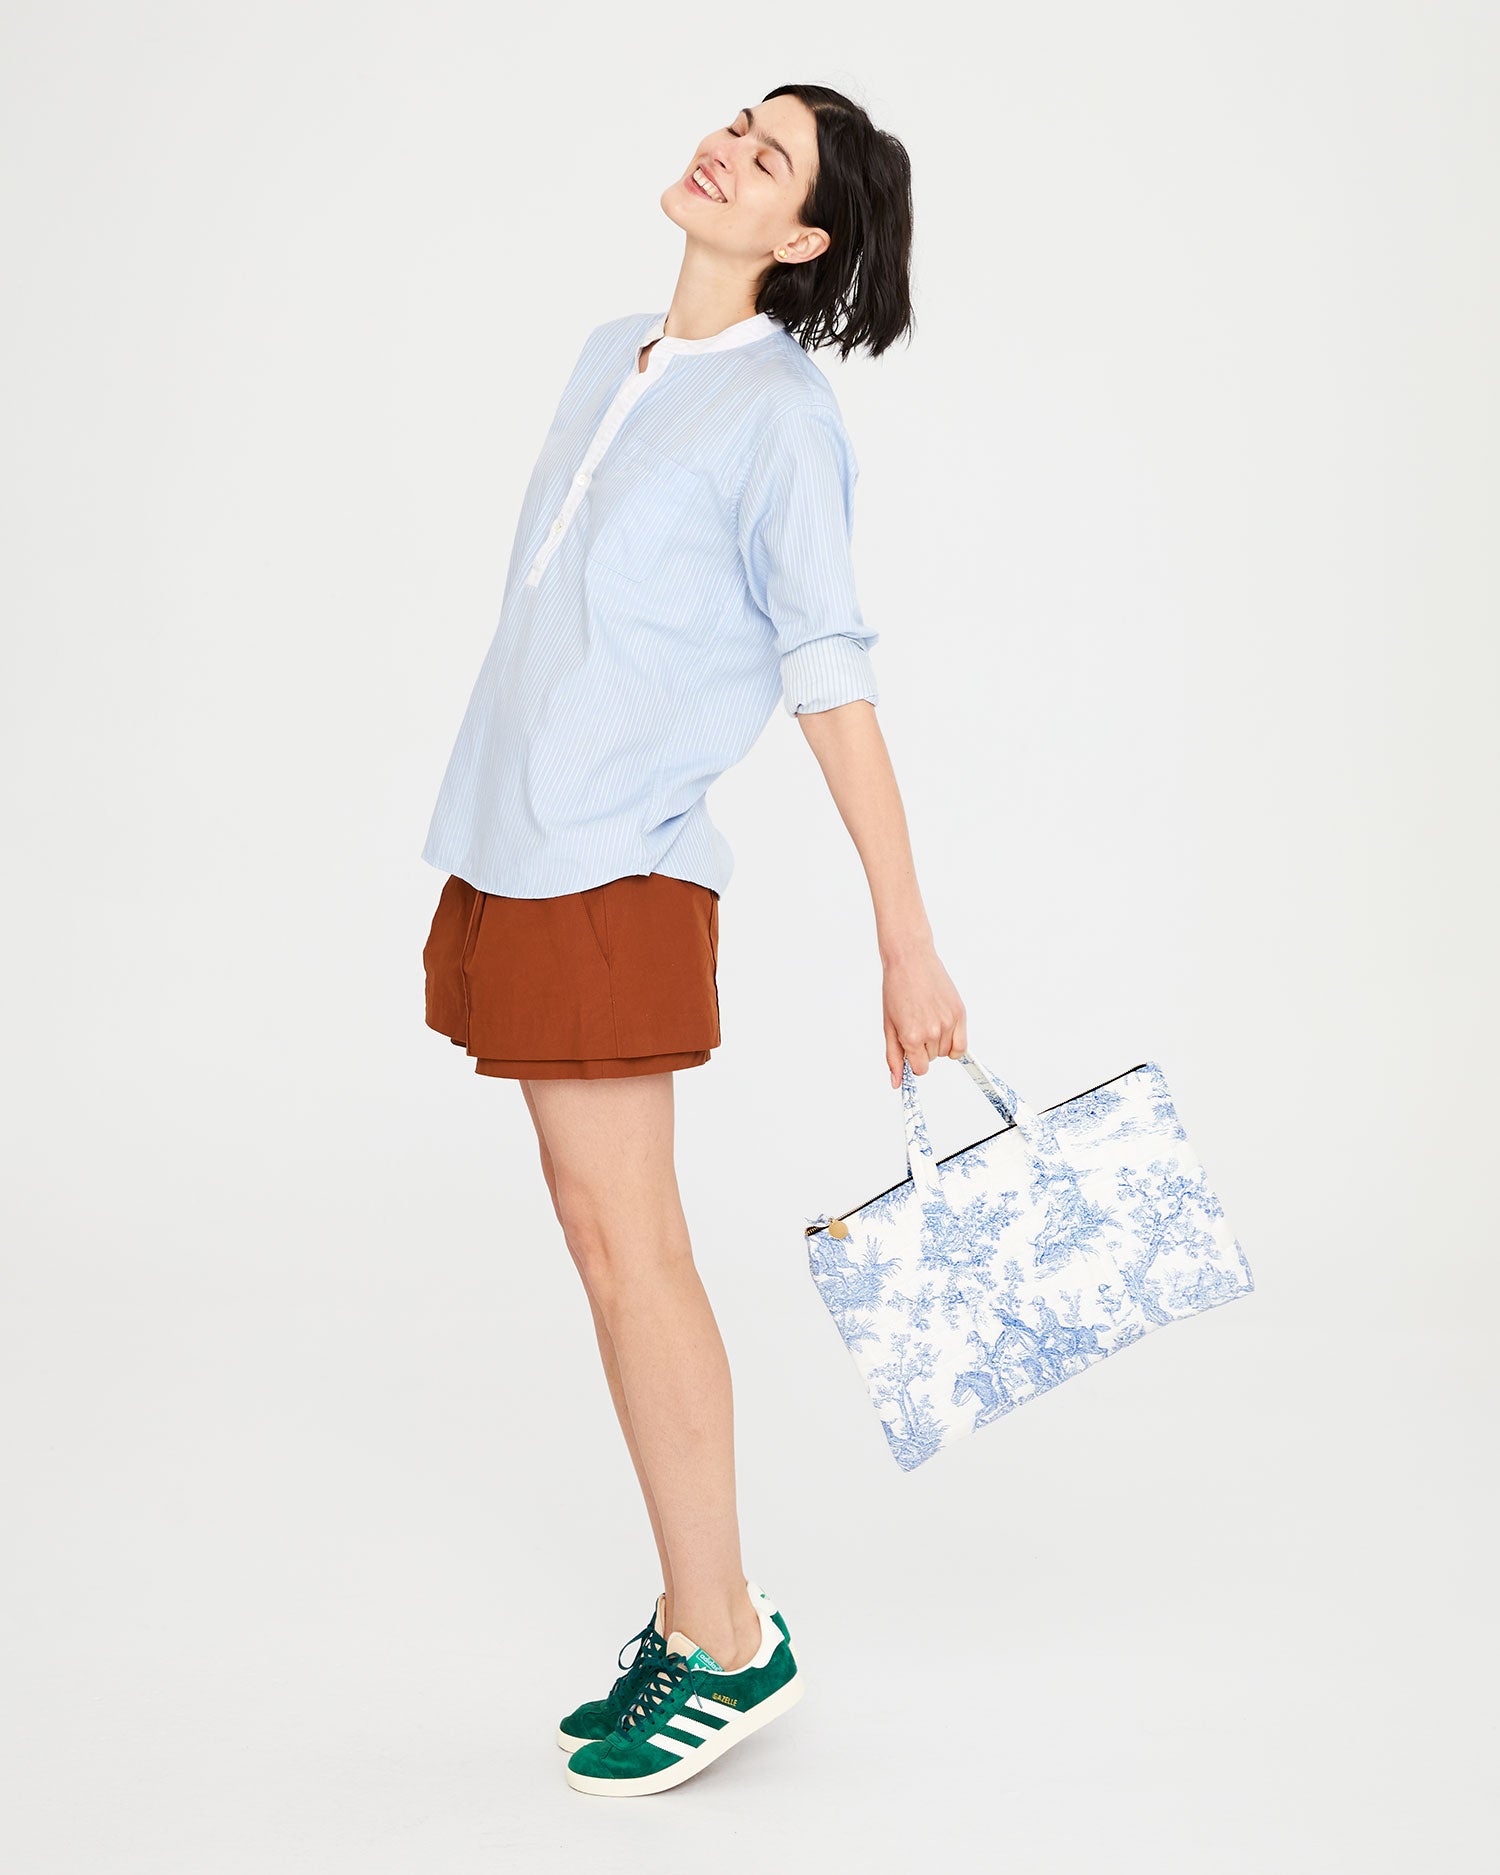 Athena standing on her tip toes while swinging the St. Calais Blue Quilted Linen Toile Laptop Case.